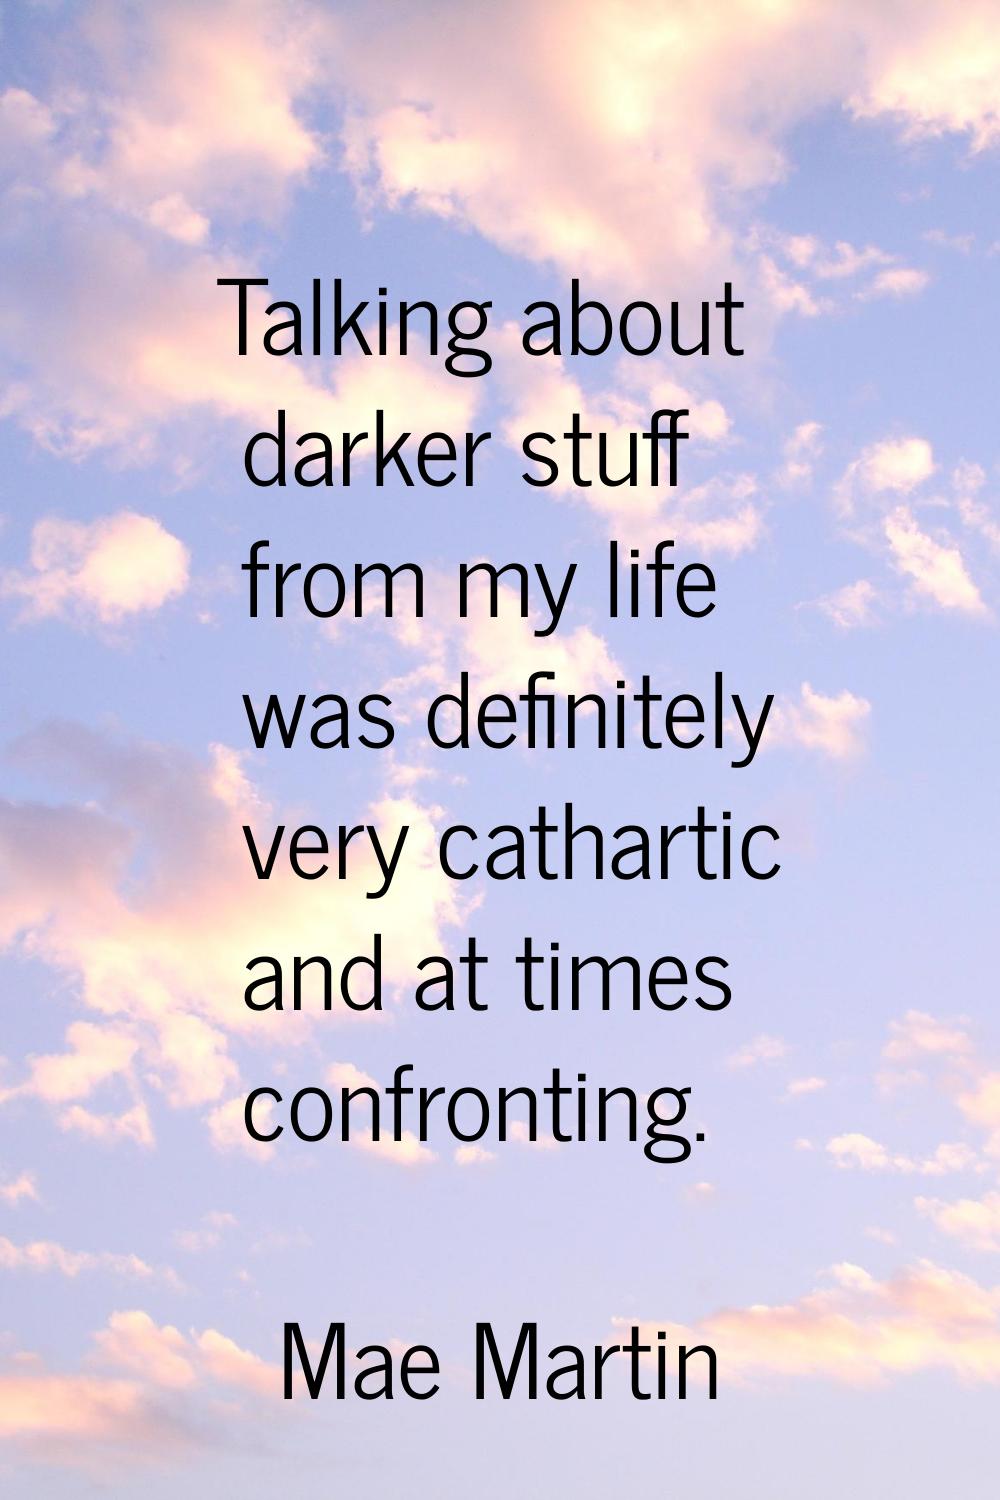 Talking about darker stuff from my life was definitely very cathartic and at times confronting.